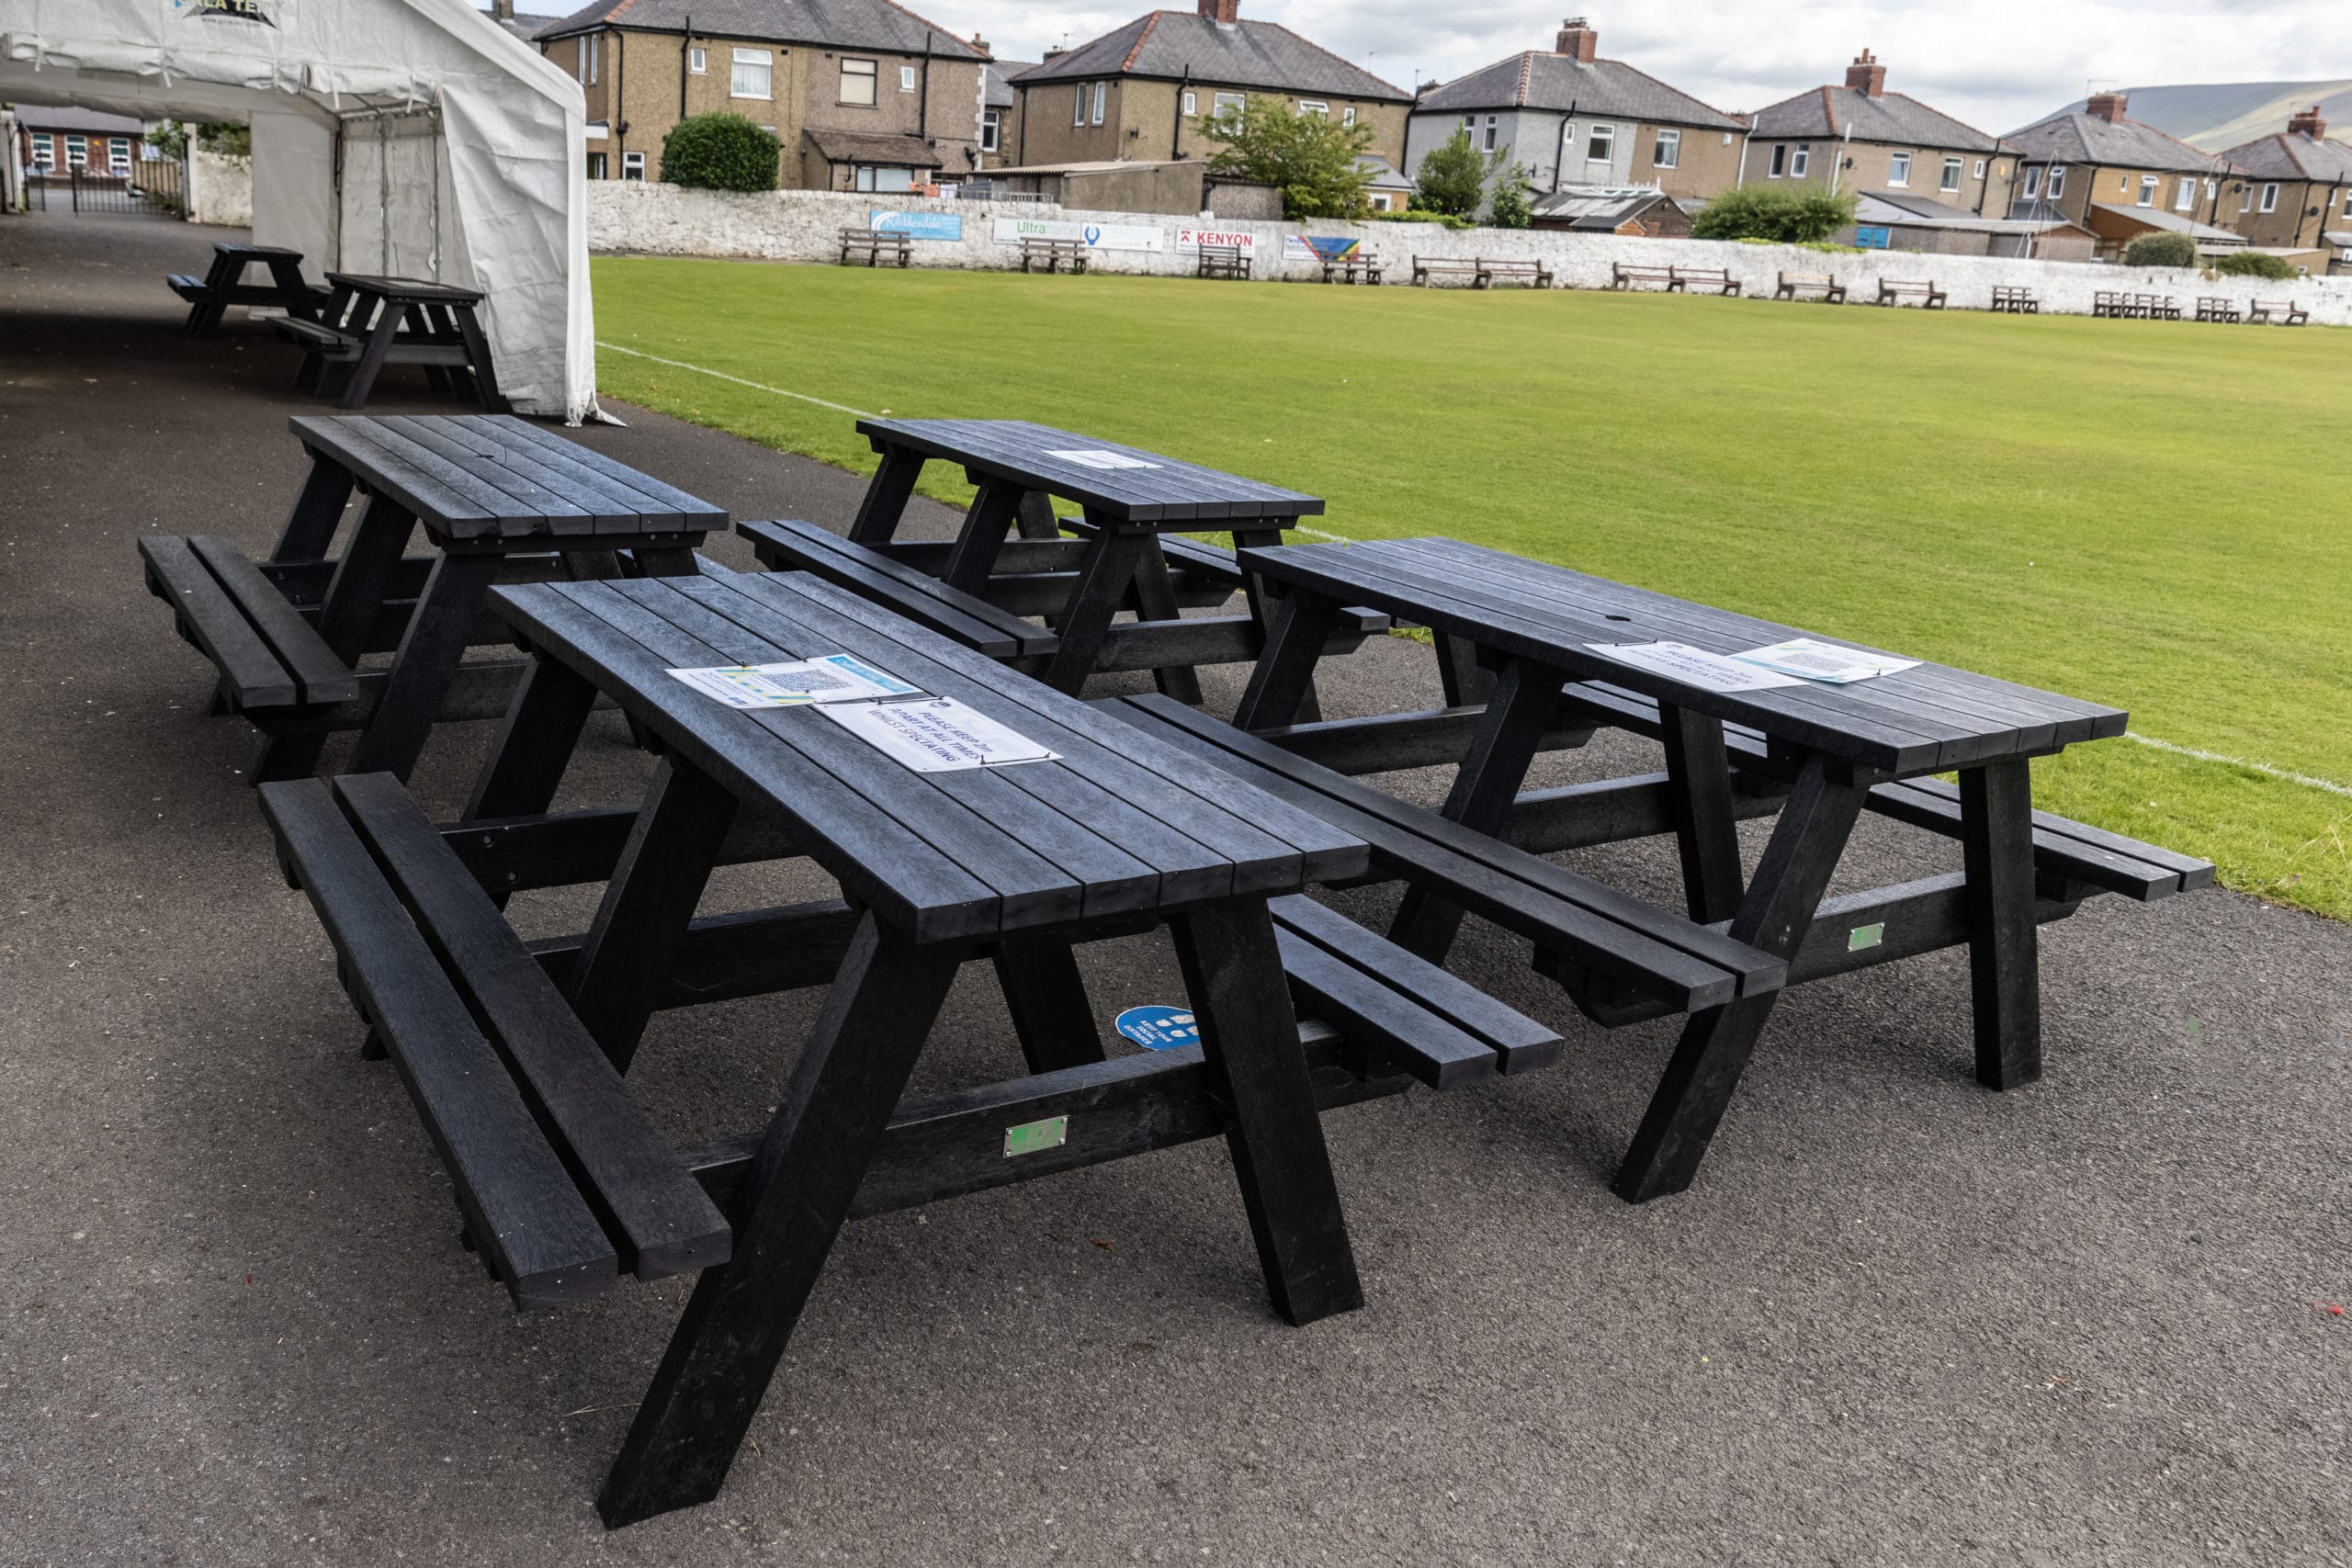 Denholme tables at Ribblesdale Cricket Club, part of the 5 for 4 offer